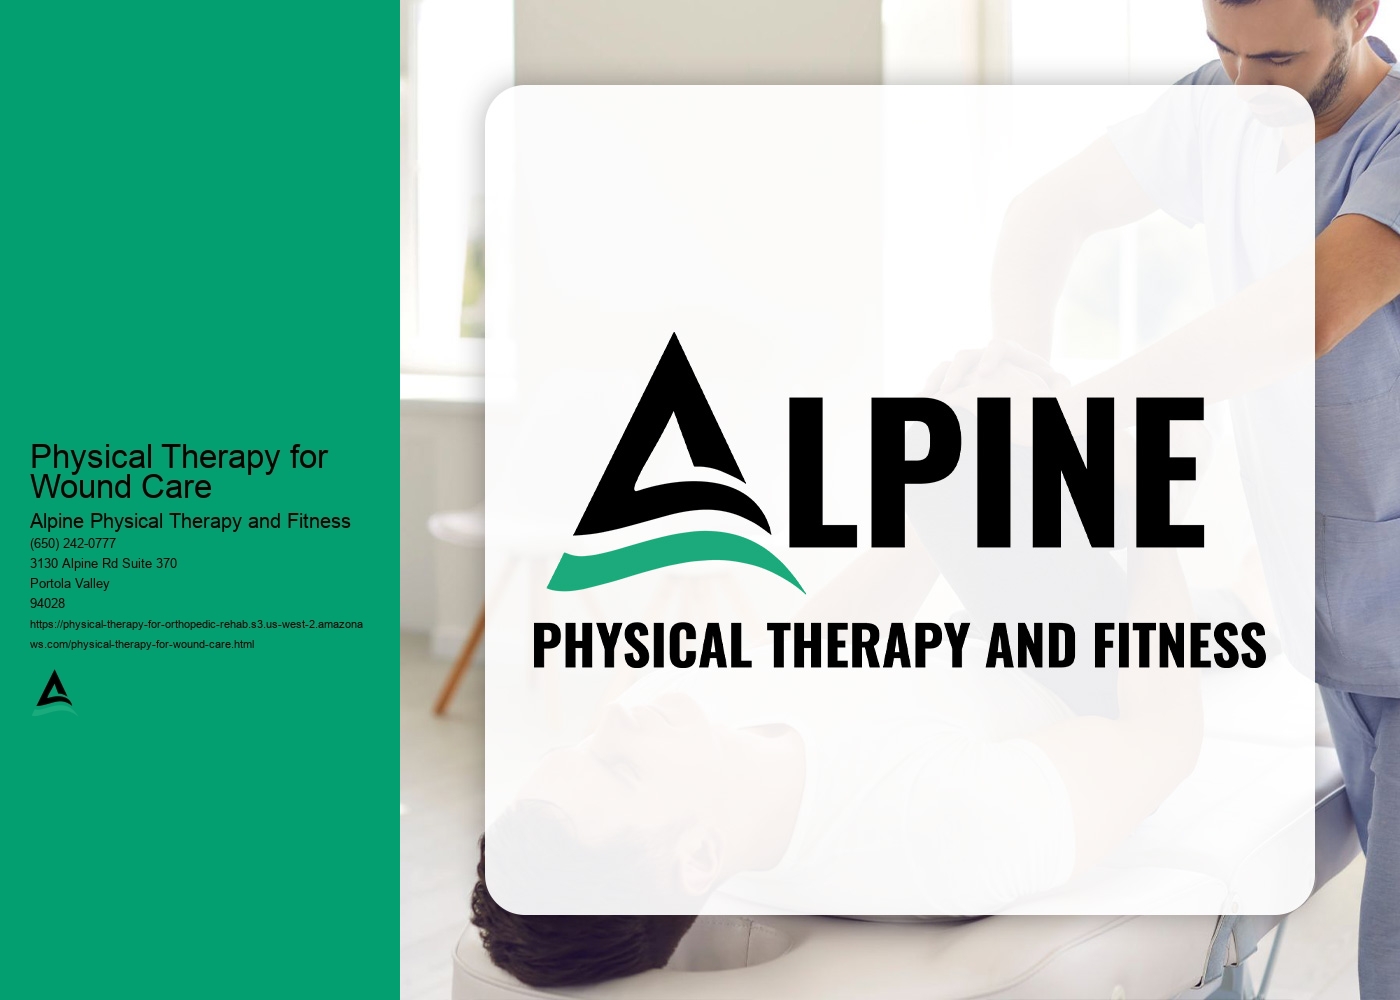 What are the potential benefits of incorporating physical therapy into a wound care treatment plan?